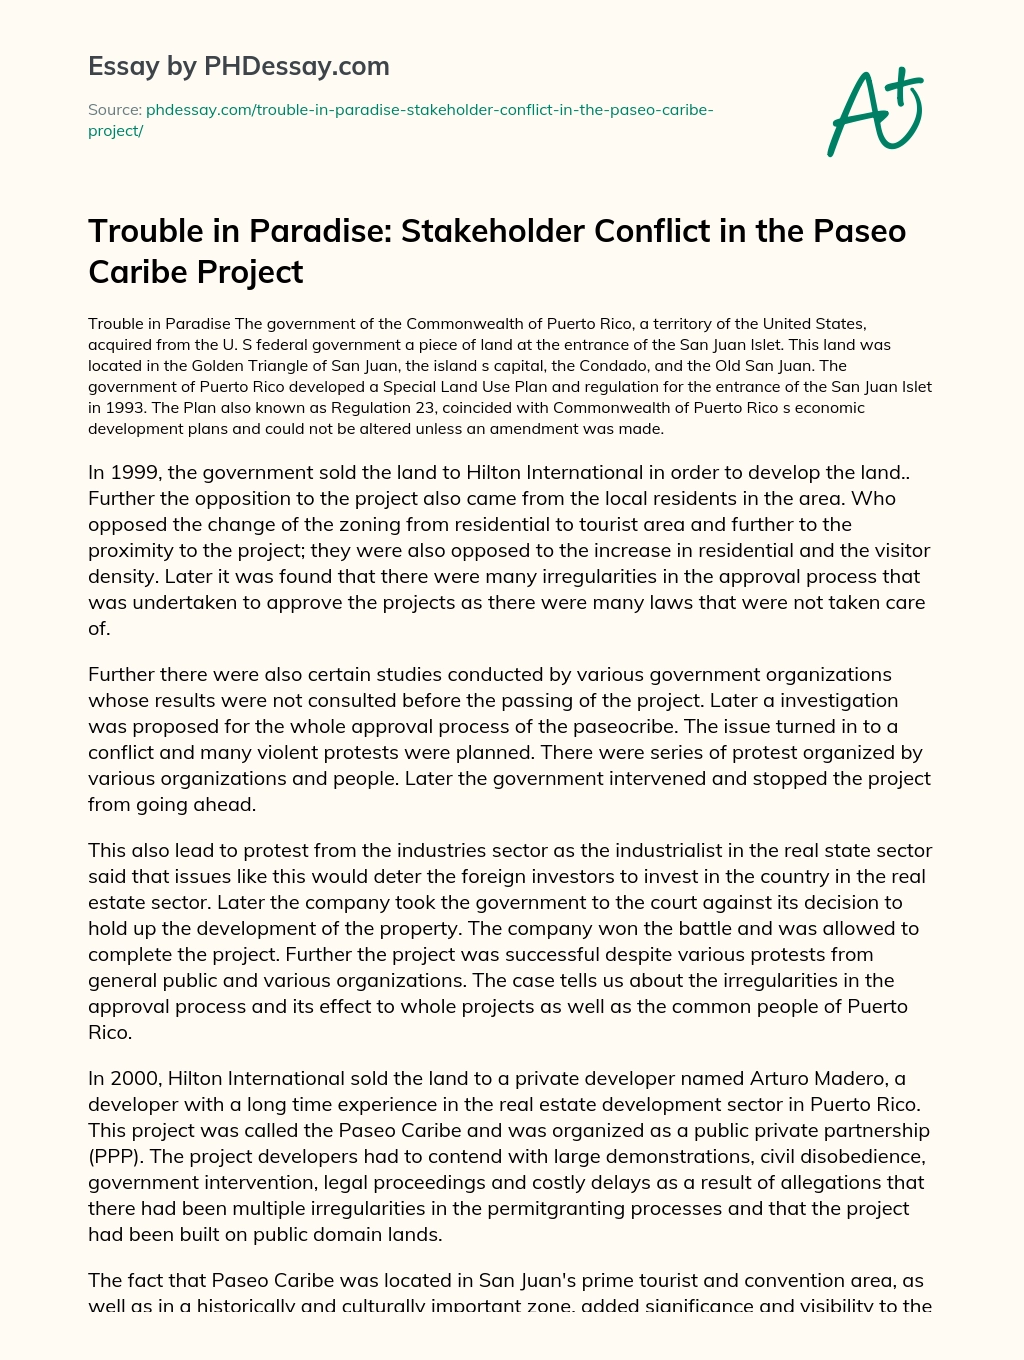 Trouble in Paradise: Stakeholder Conflict in the Paseo Caribe Project essay